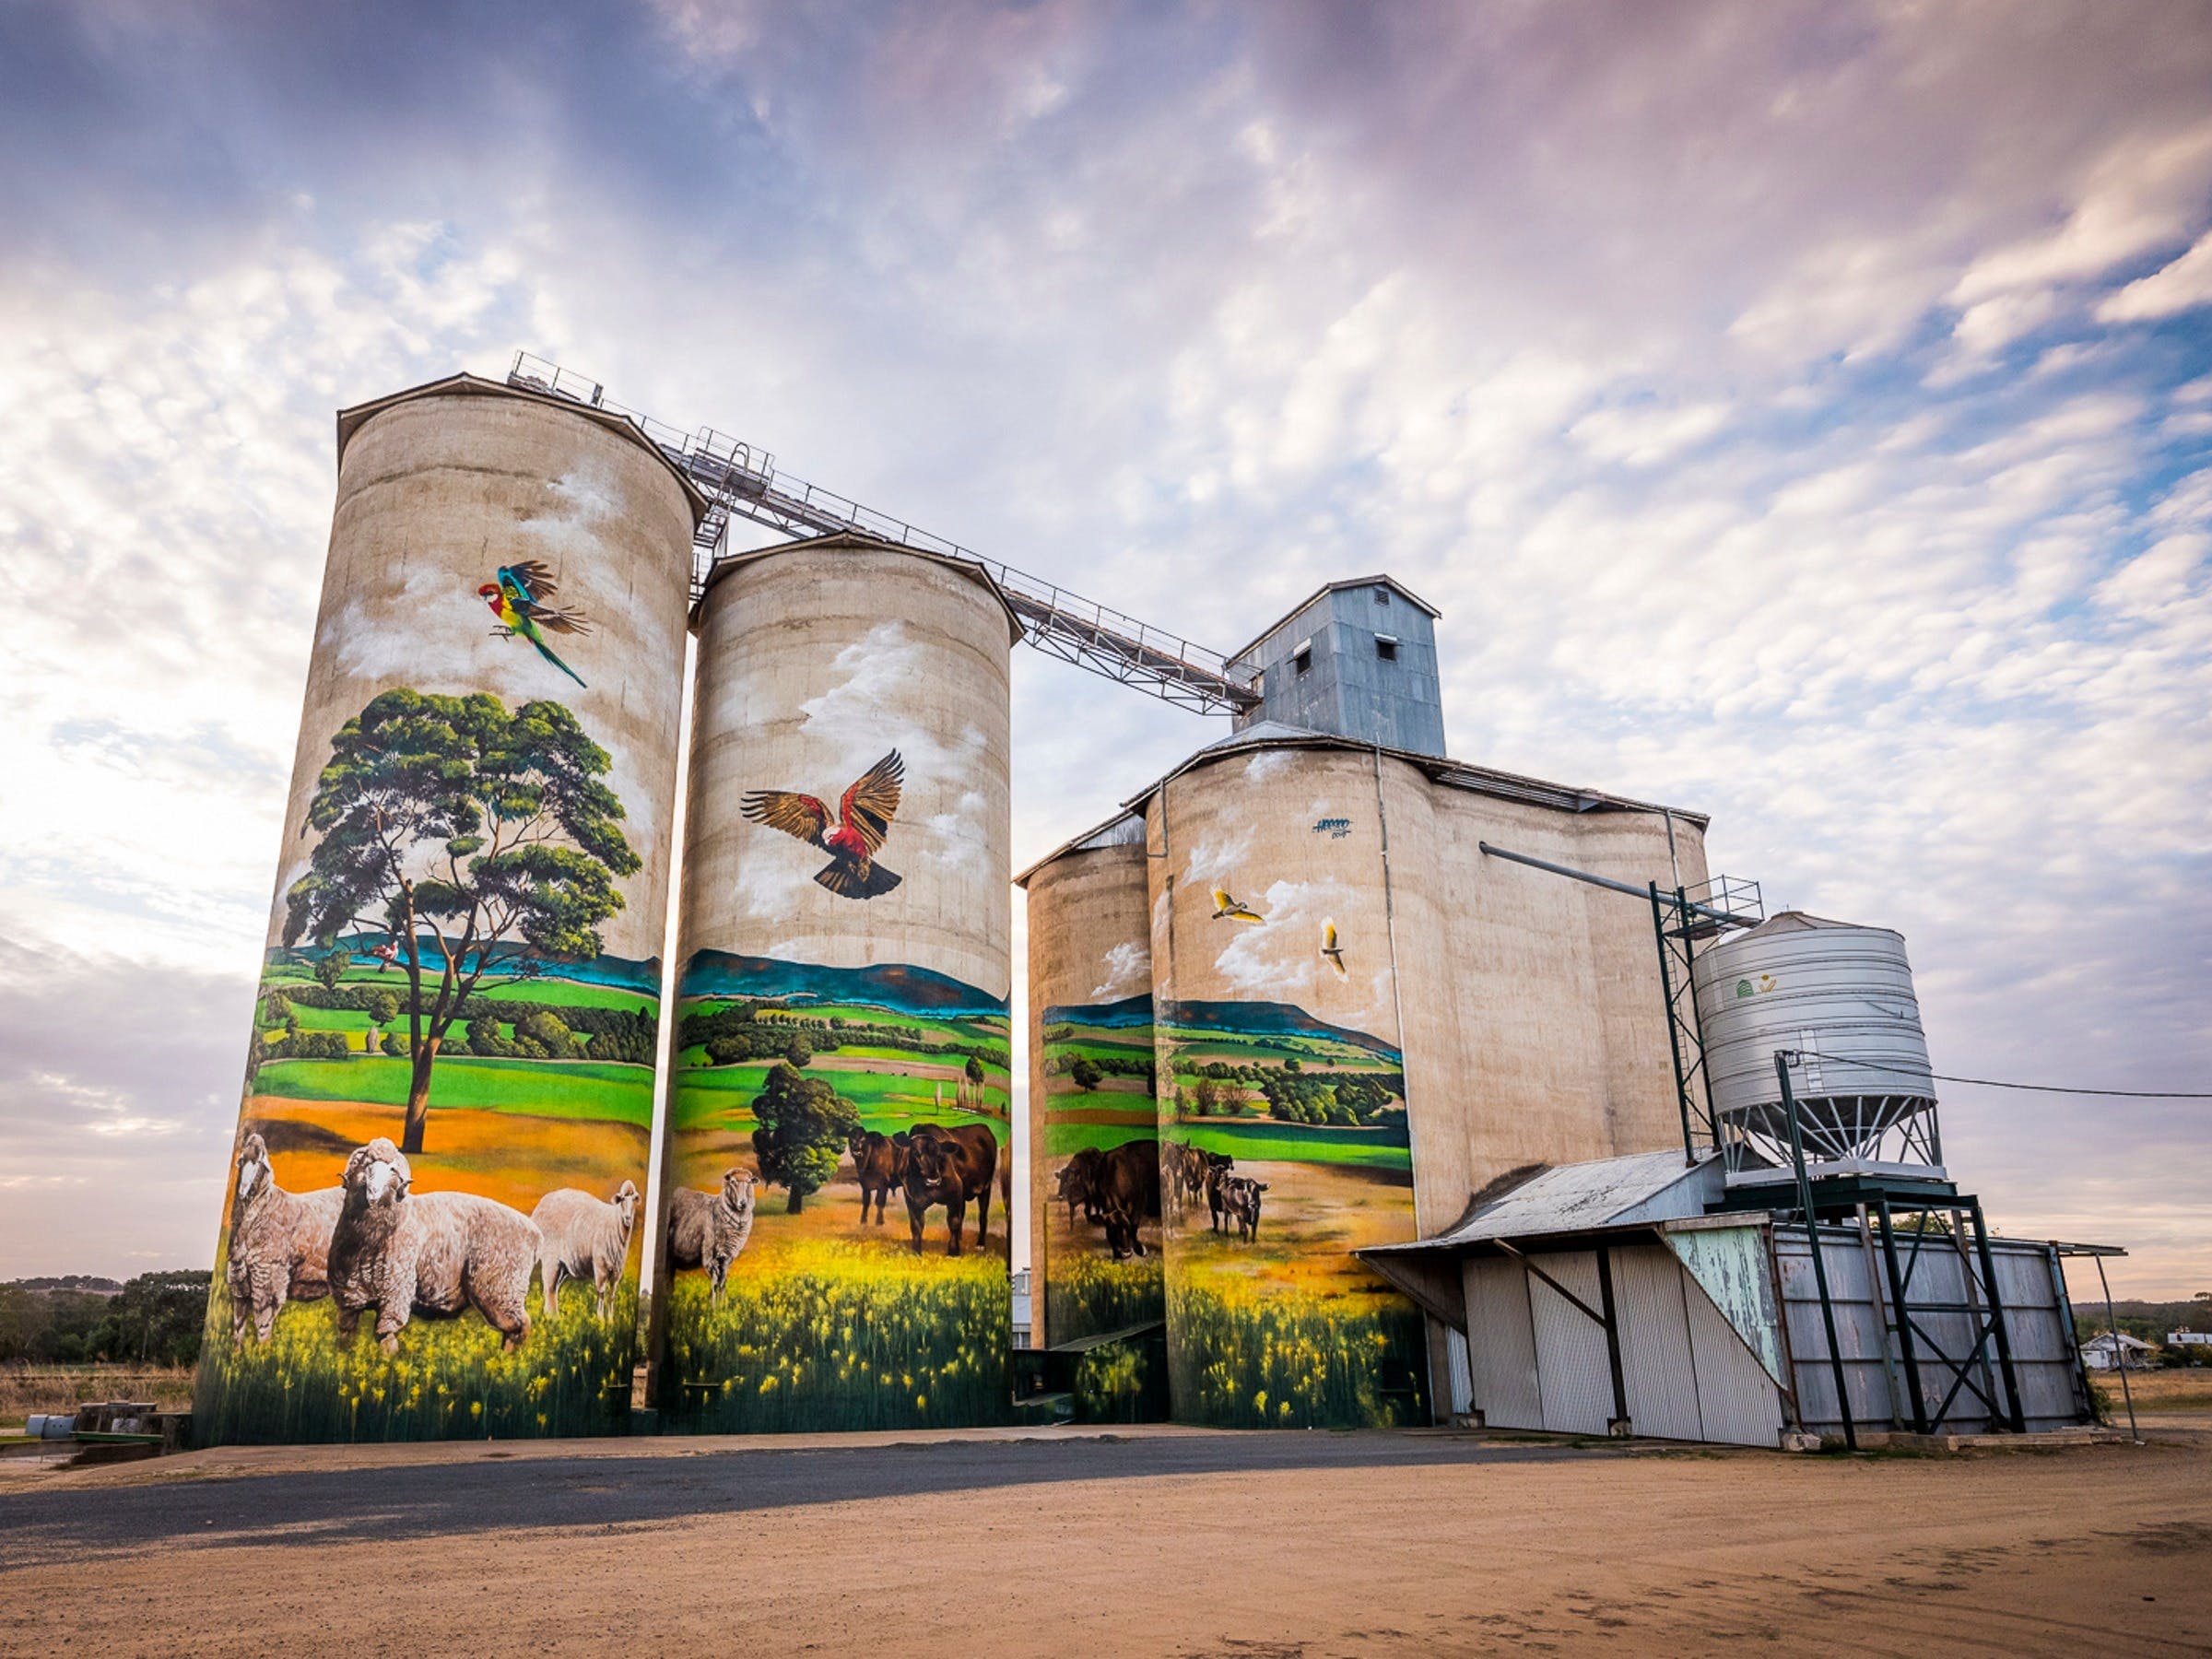 Grenfell Commodities Silos - Attractions